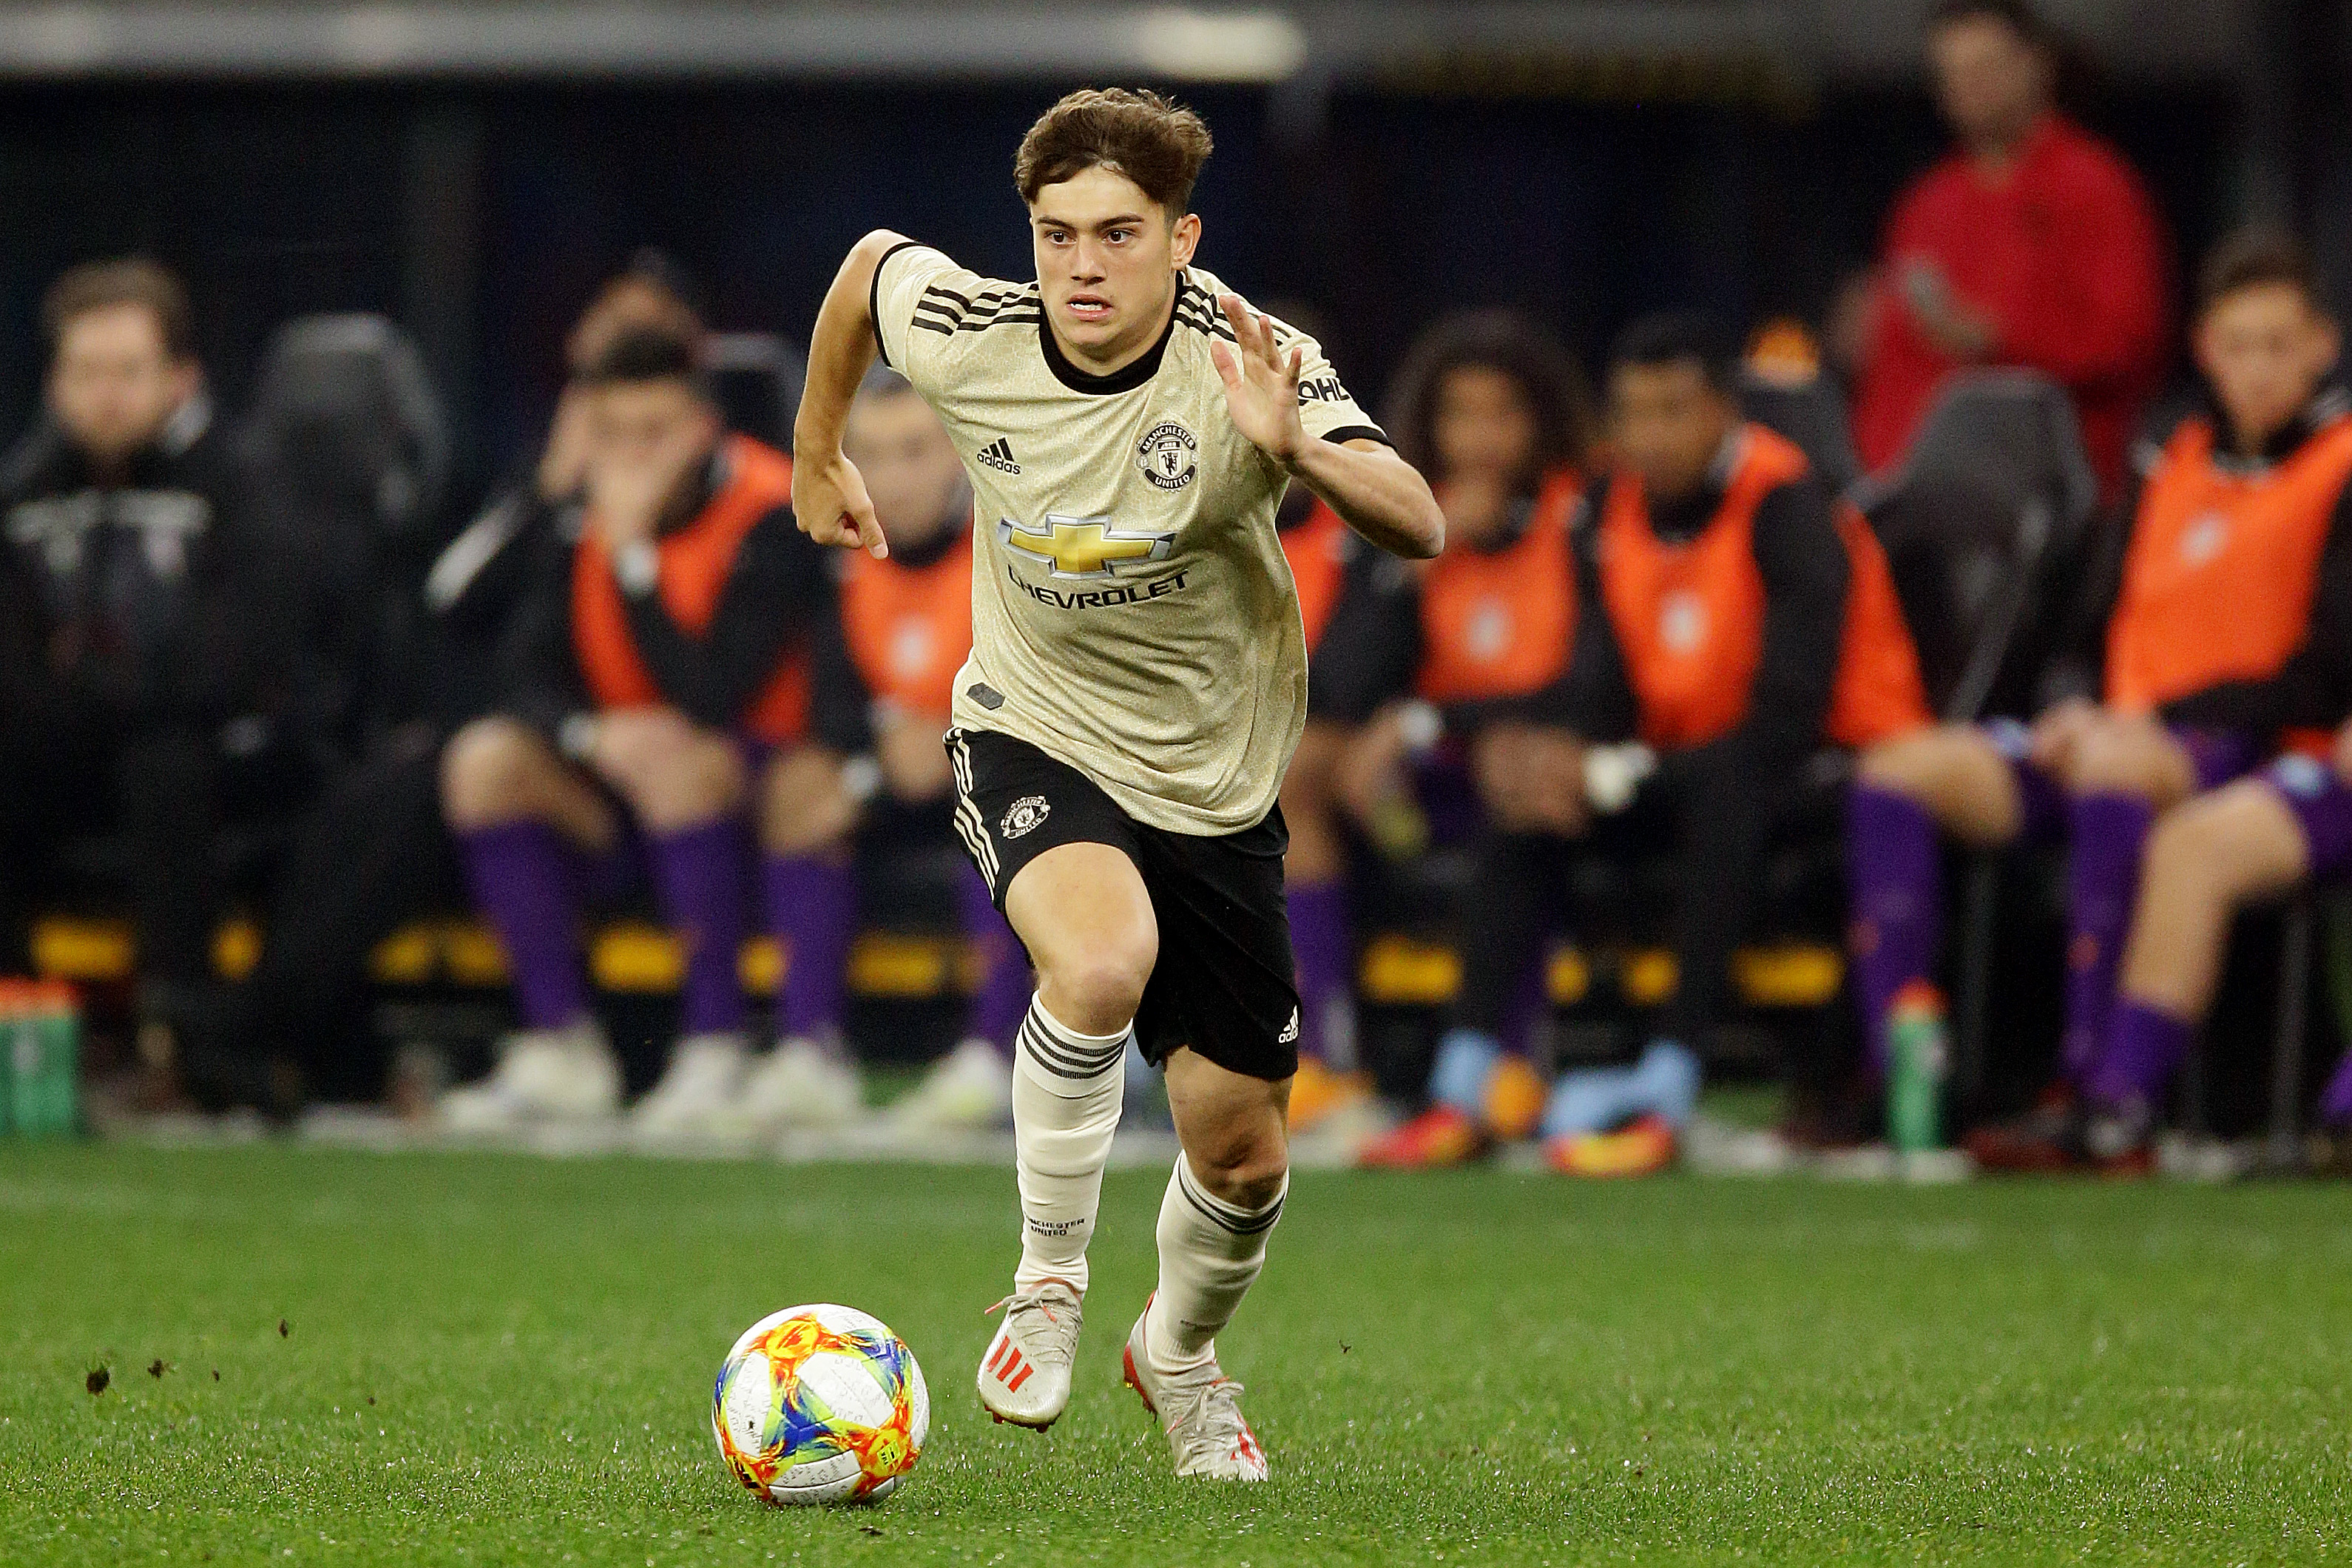 Daniel James hoping to emulate Ryan Giggs at Manchester United (Photo by Will Russell/Getty Images)